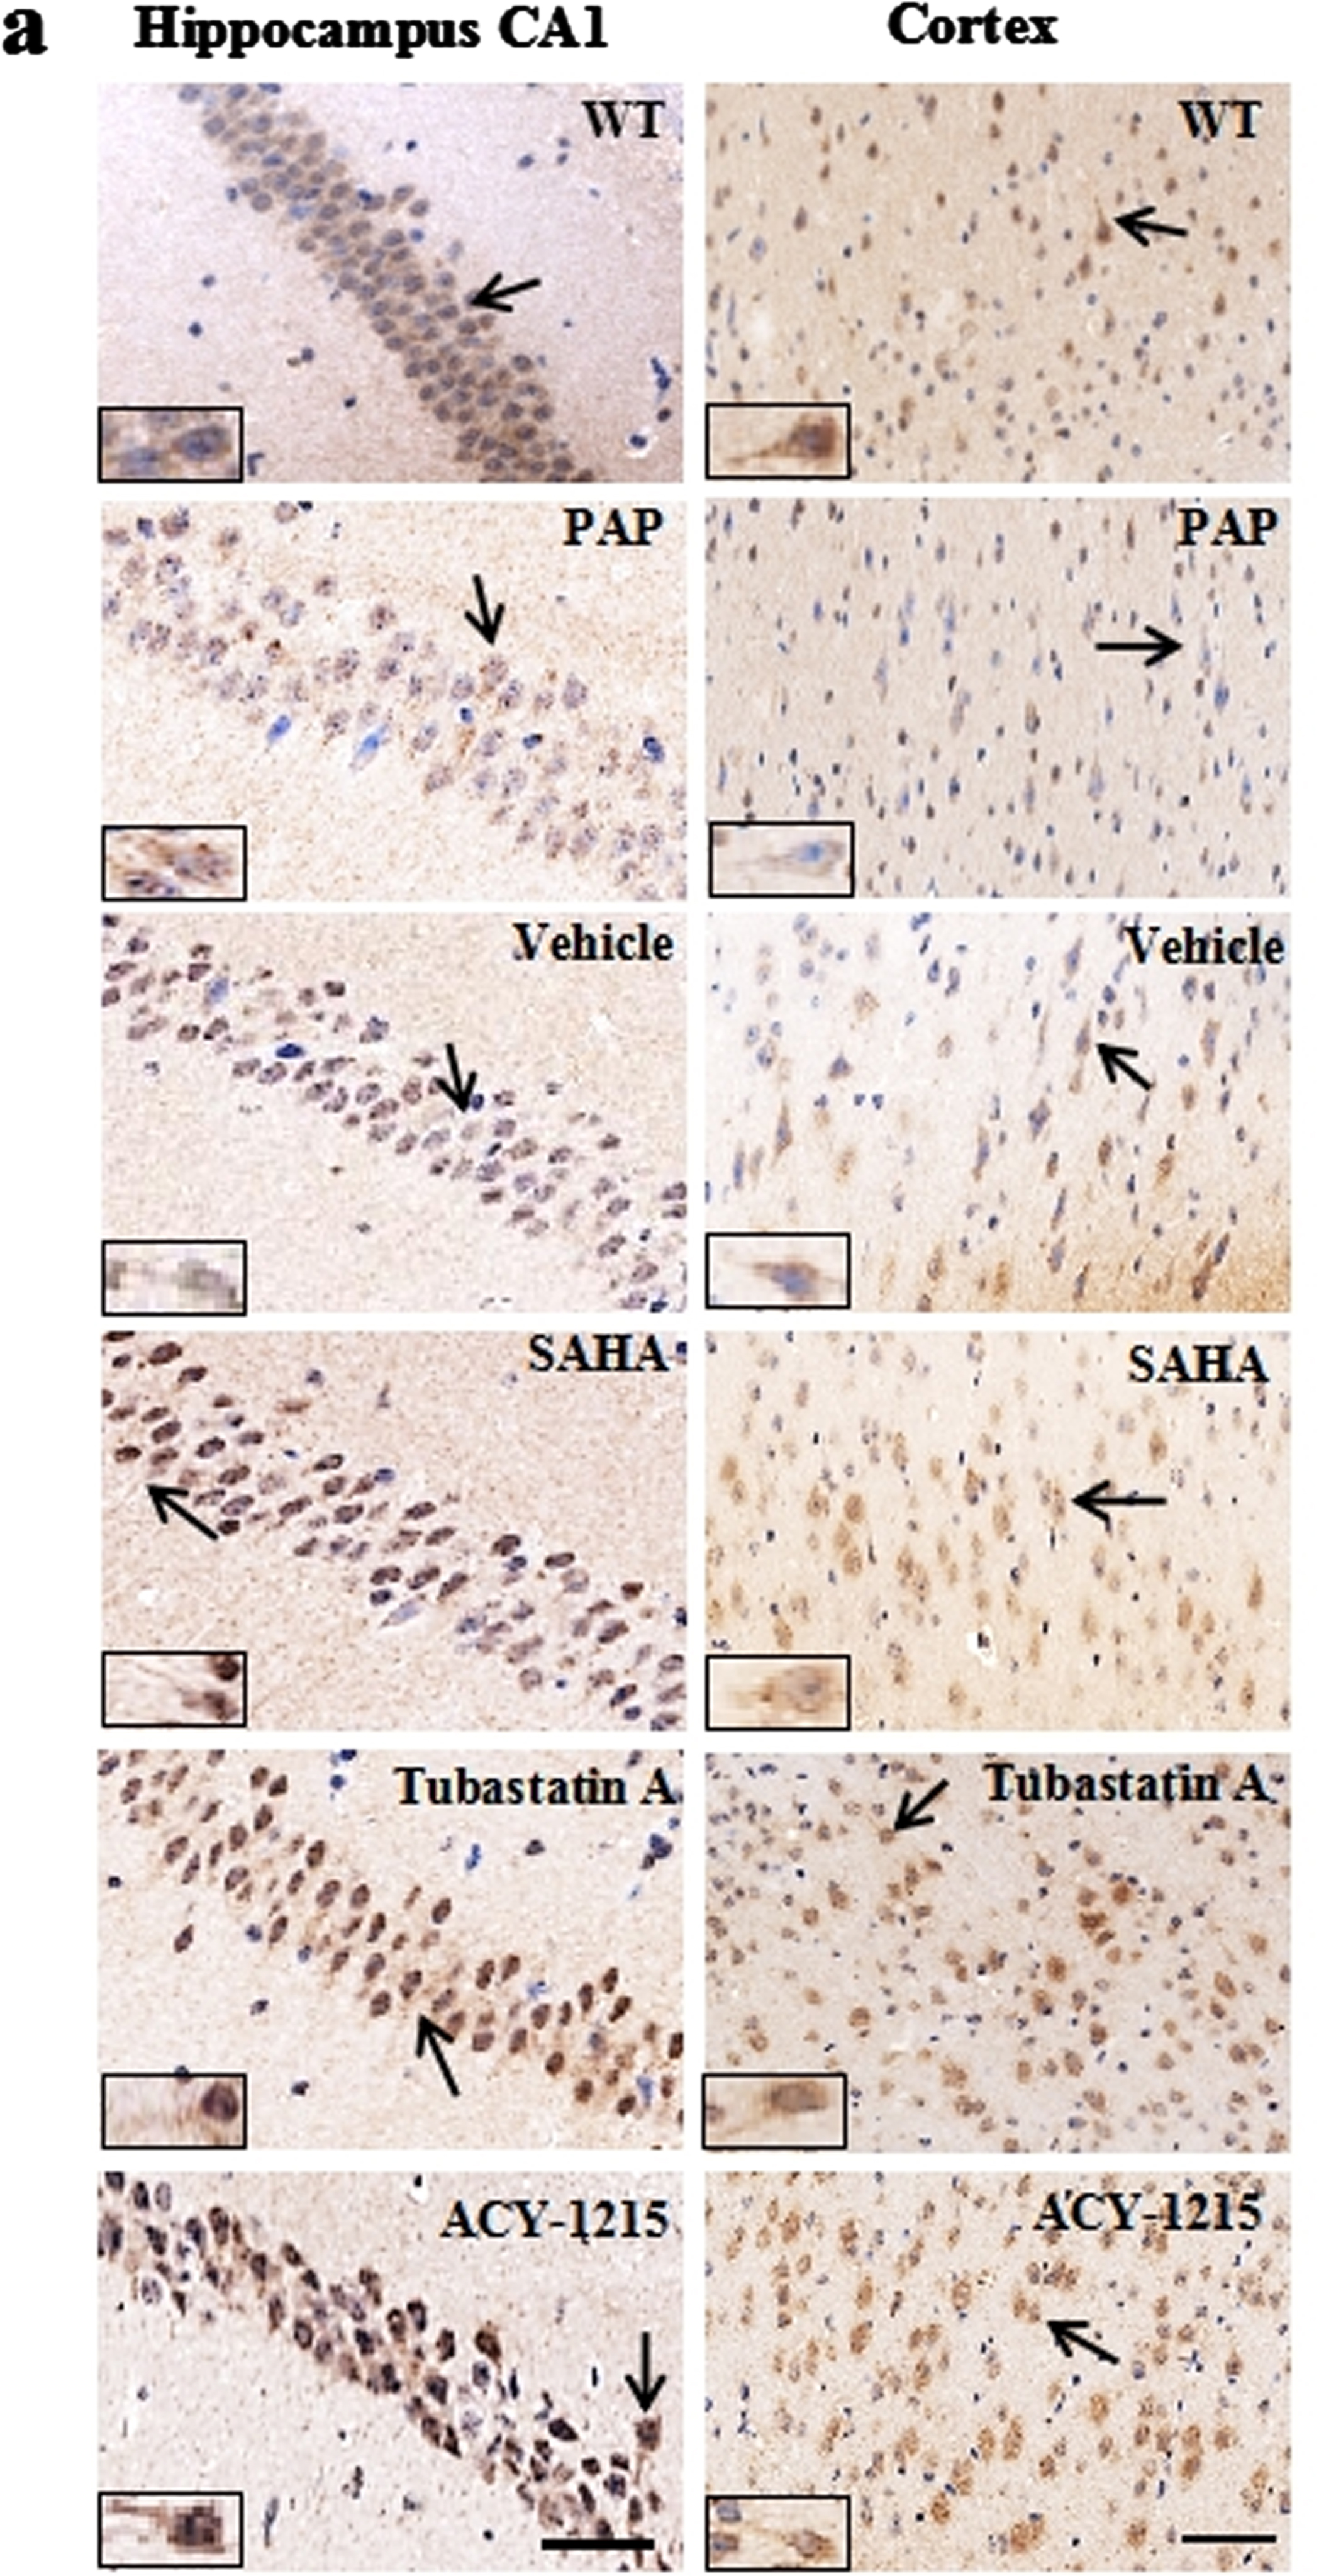 (a). Representative images showing increased immunoreactivity of ace-α-tubulin (K40) in the hippocampus (left) and prefrontal cortex (right) after Tubastatin A or ACY-1215 treatment. Scale bar: 50 μm.